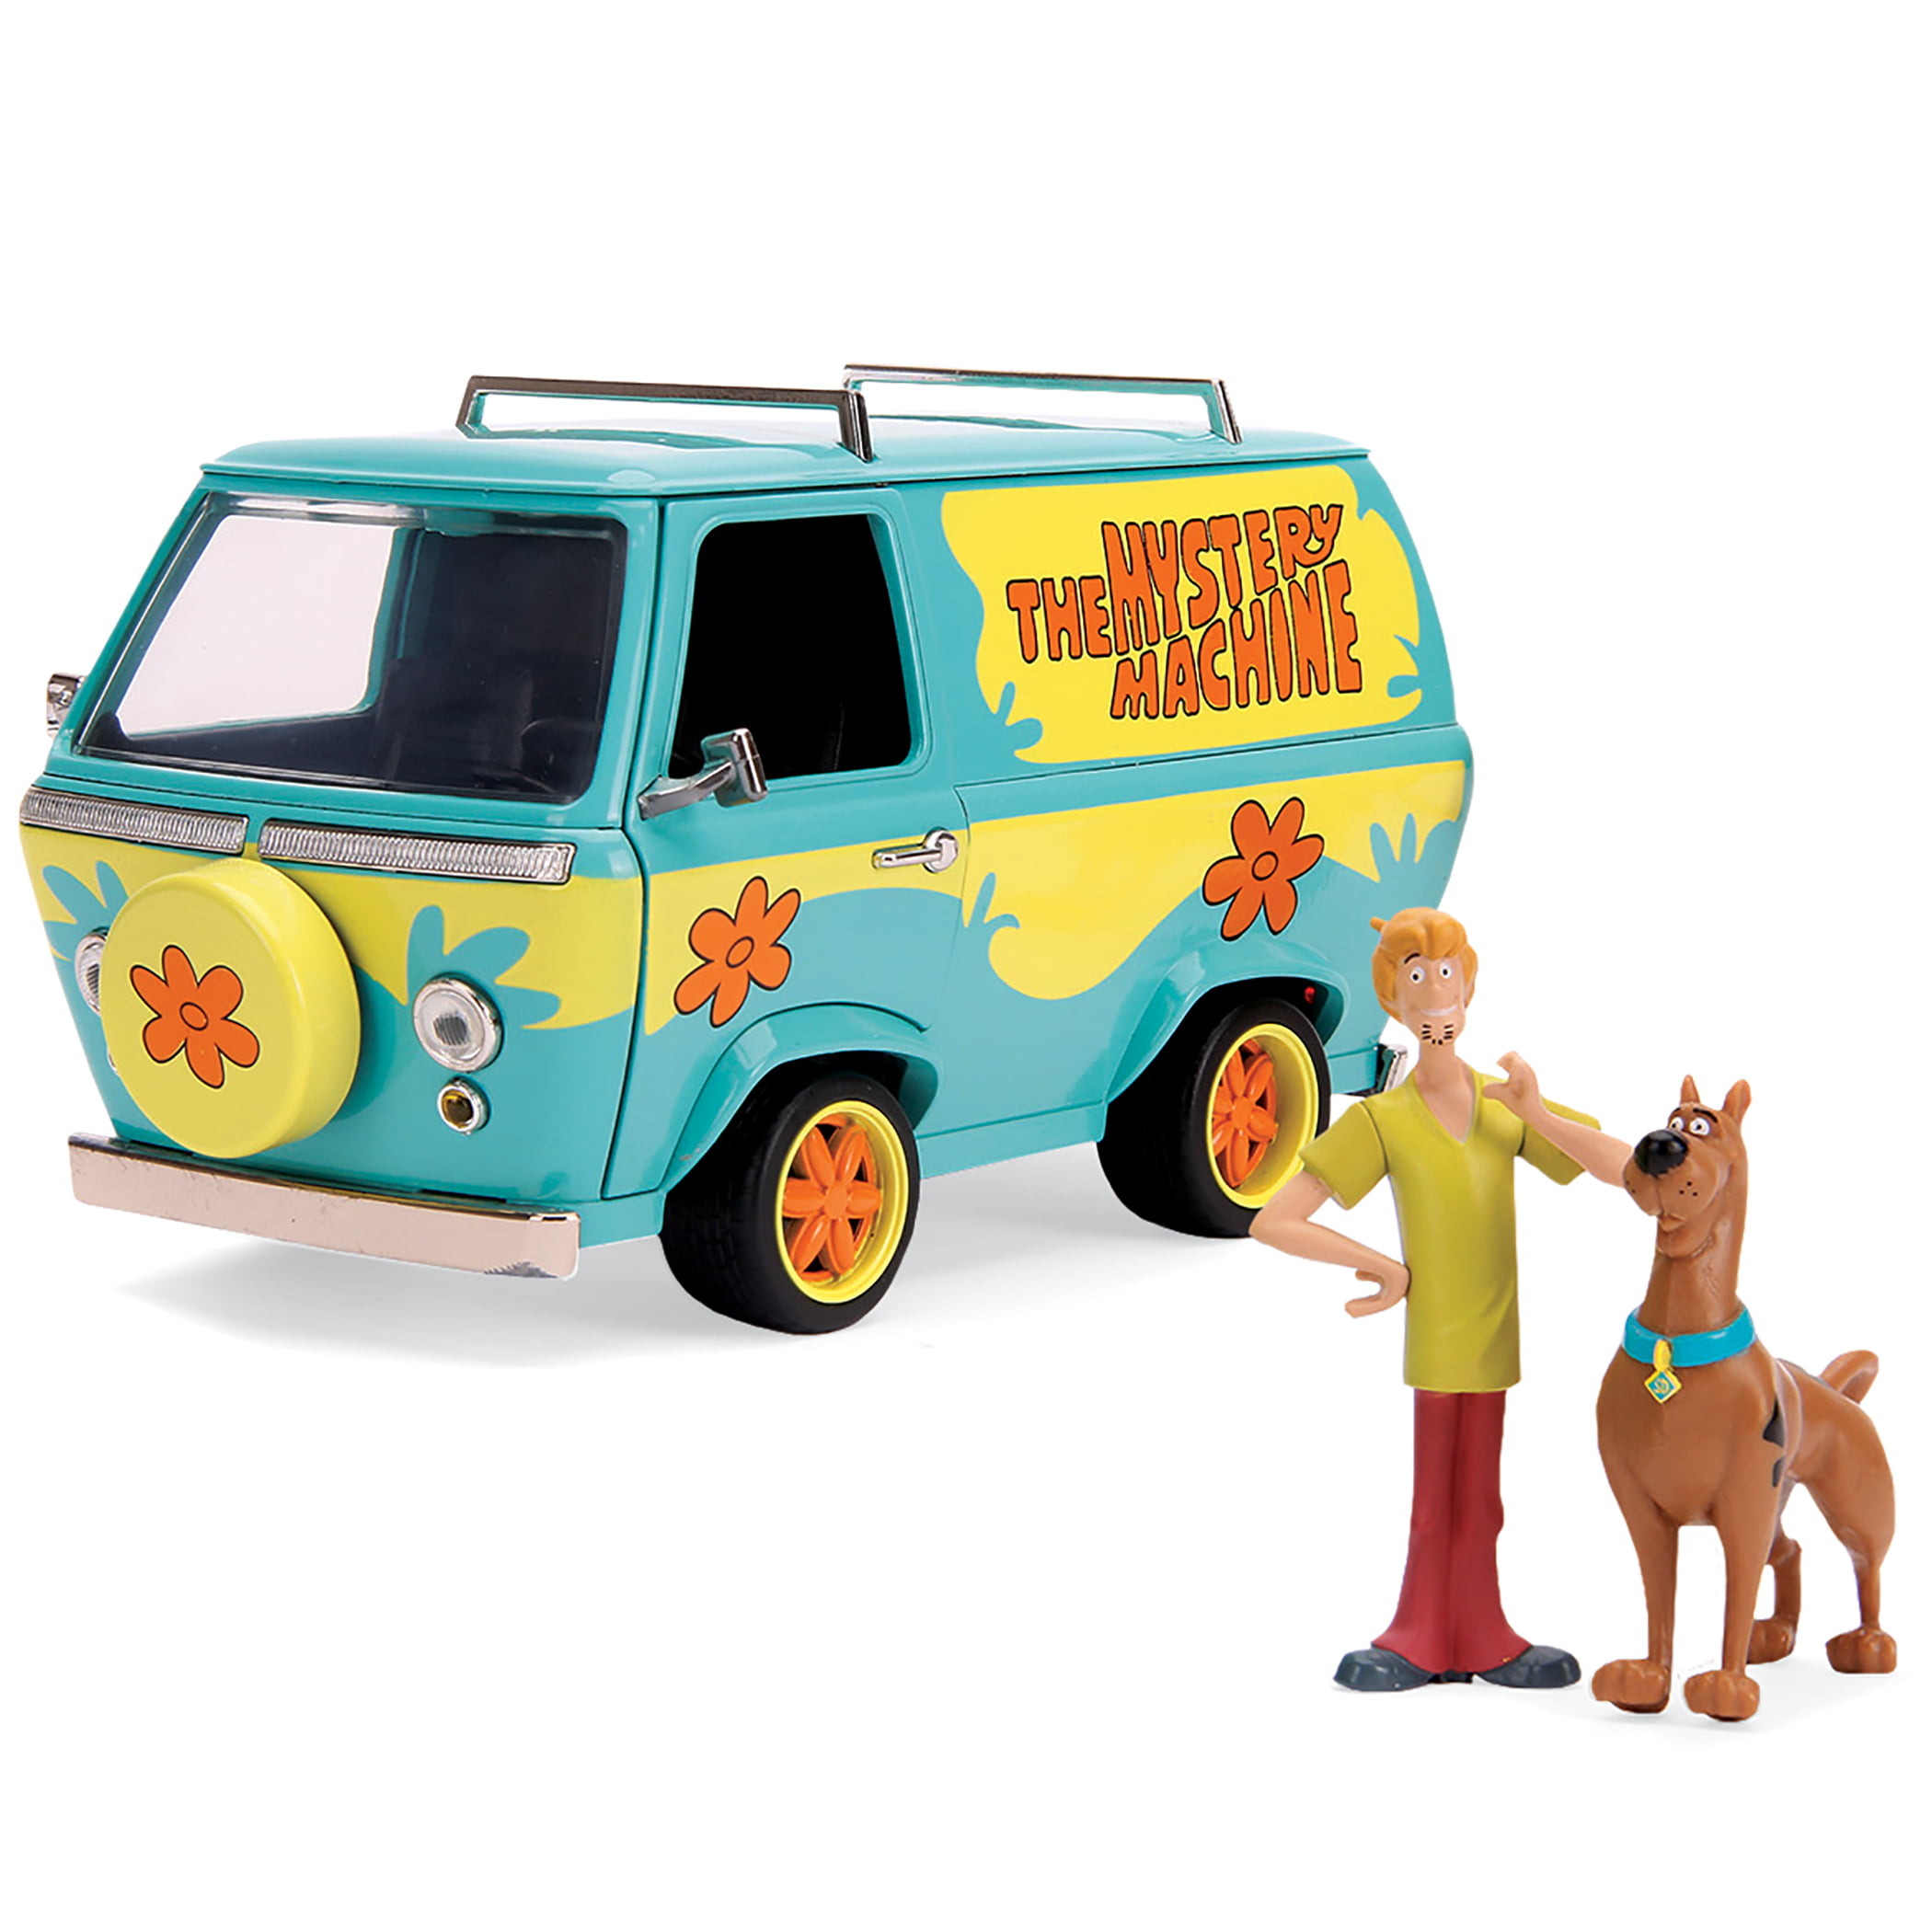 Walmart 50 Years of Scooby Doo Shaggy and The Headless Horseman Figure for sale online 